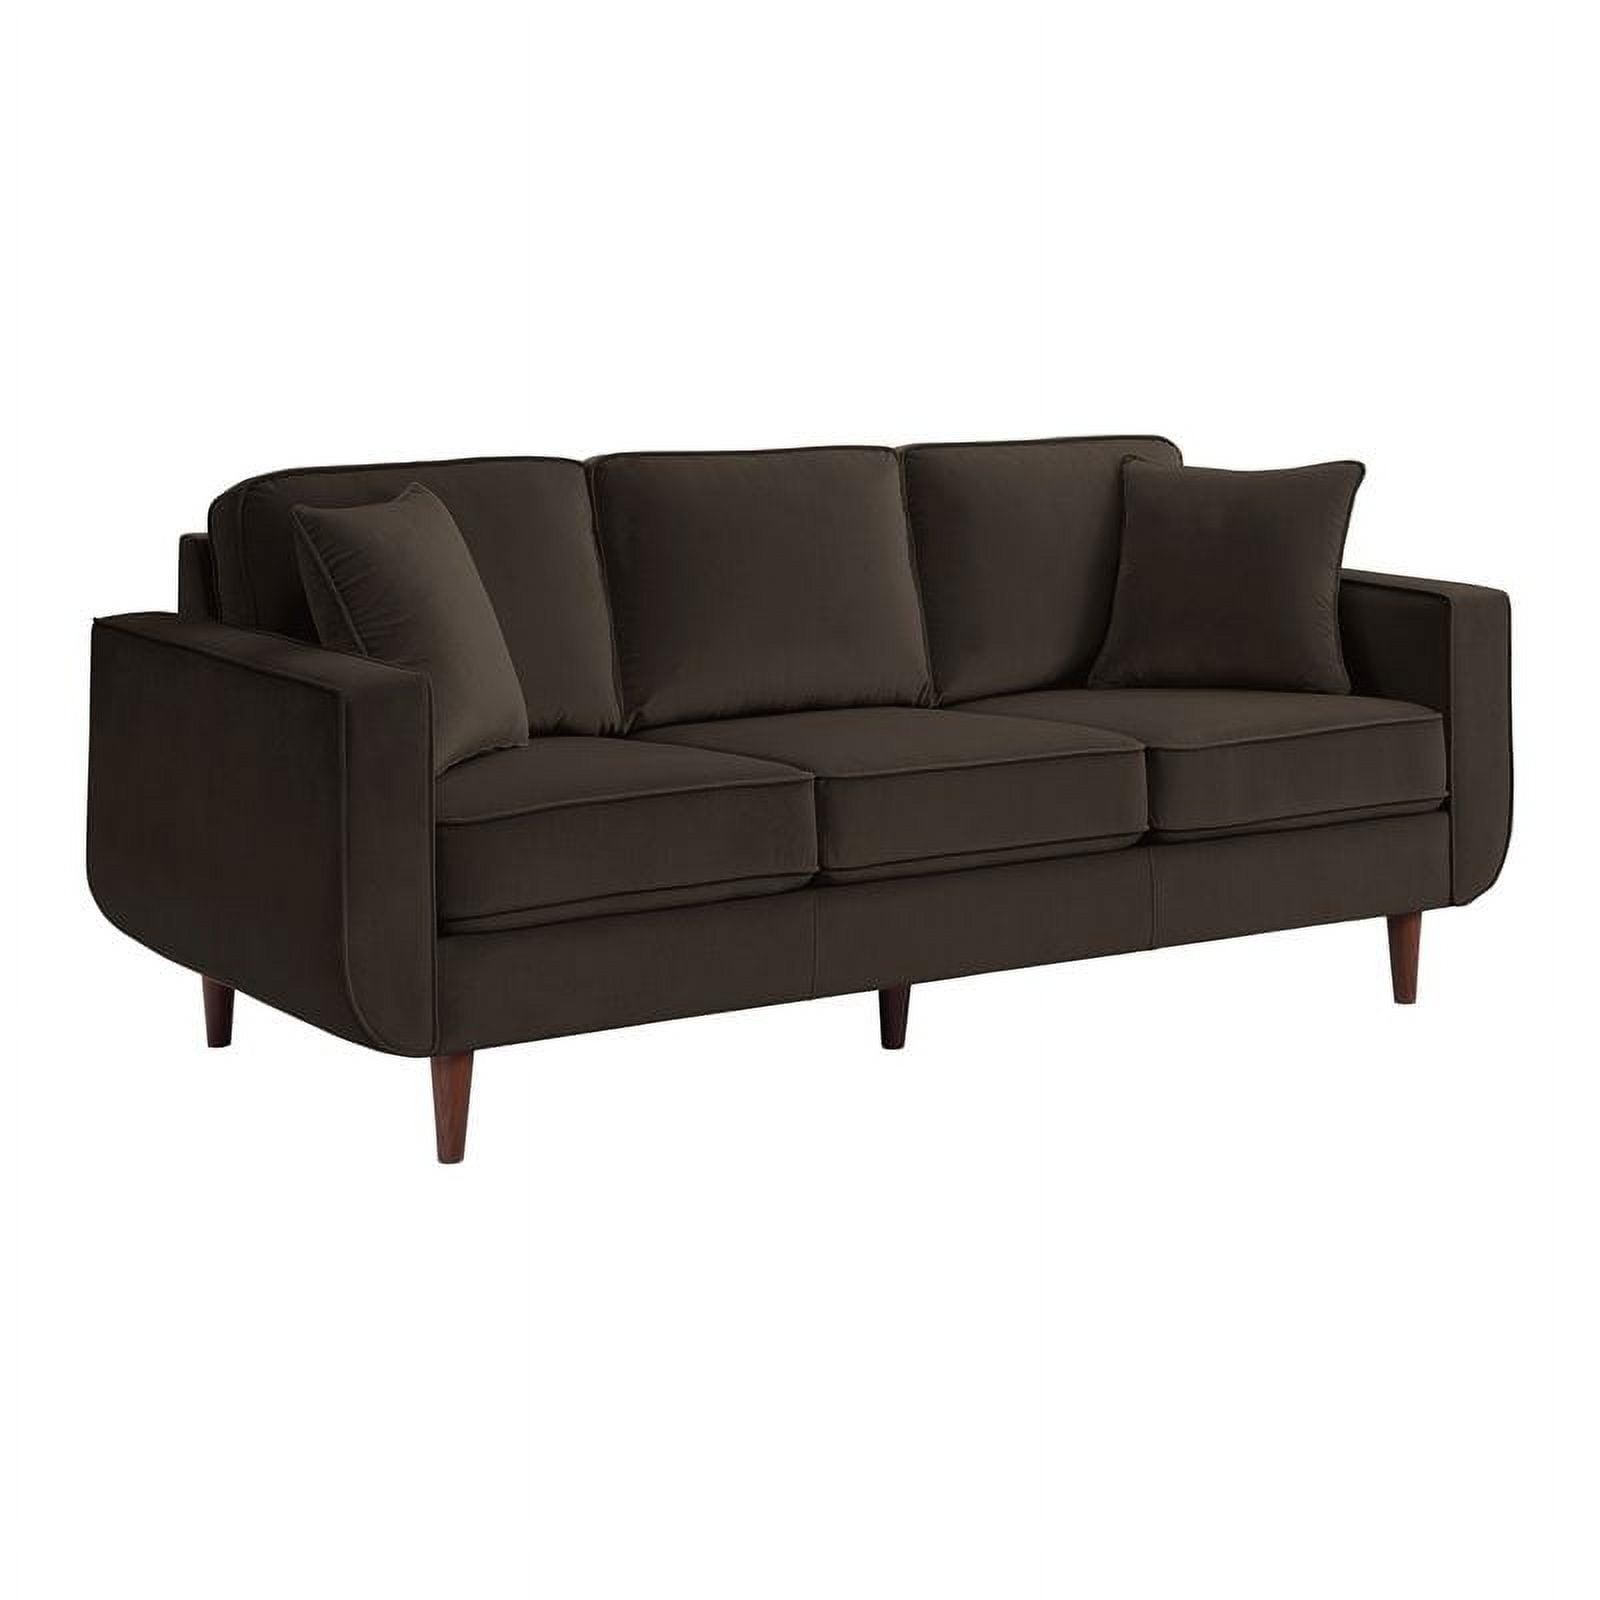 Elegant Lawson Chocolate Velvet Sofa with Wooden Legs and Innerspring Cushions